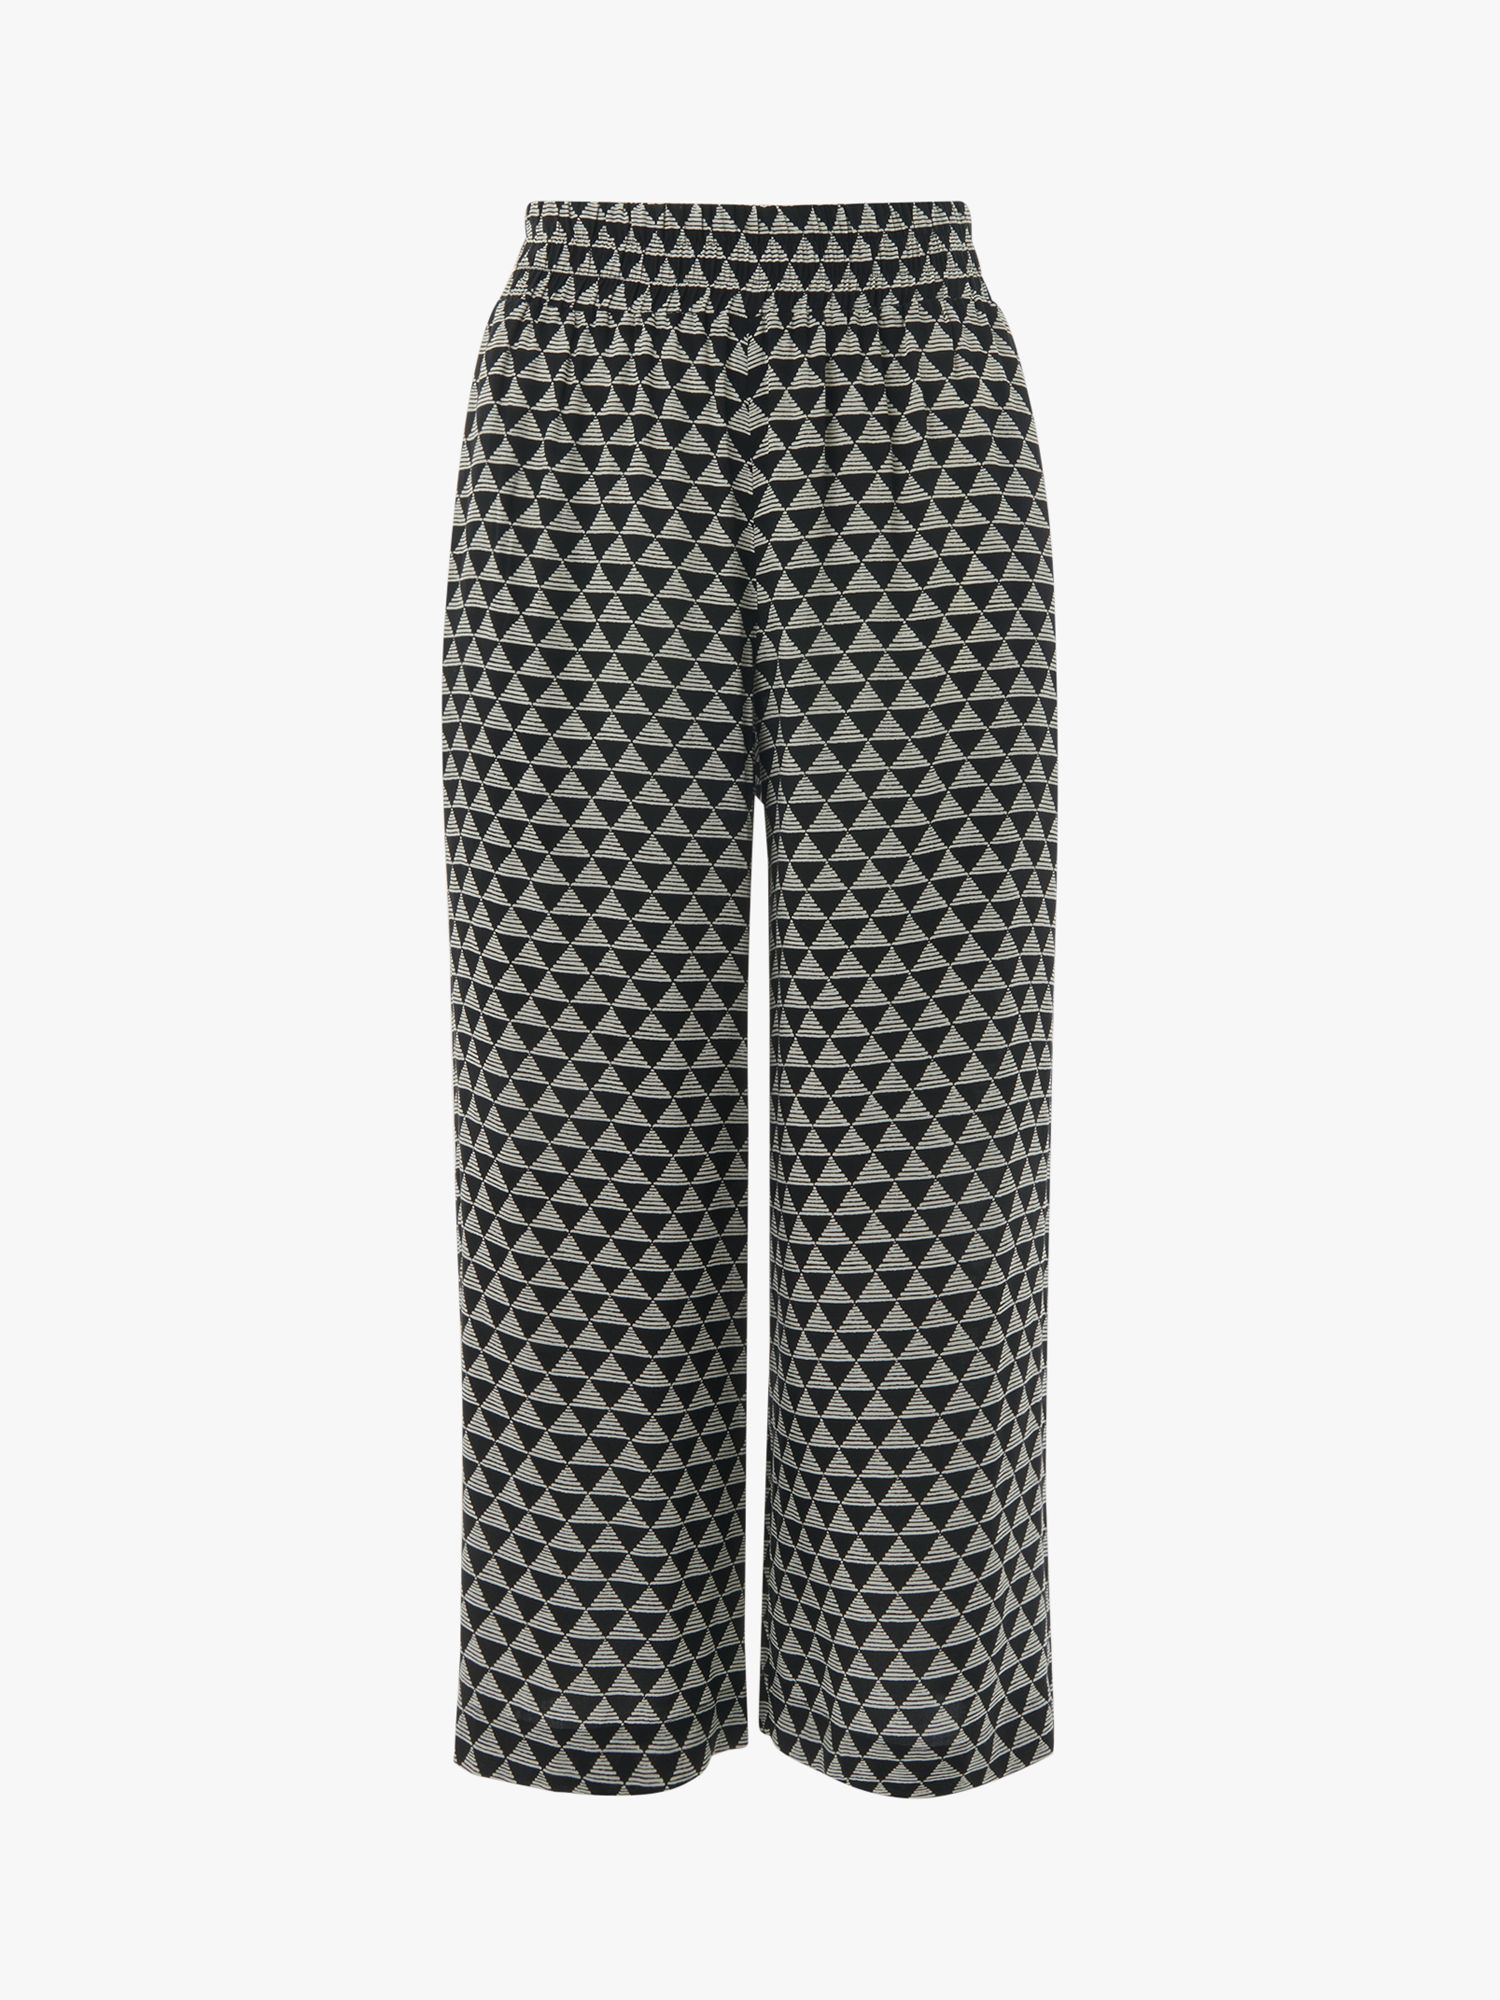 Whistles Checkerboard Wide Trousers, Black/Multi, 6